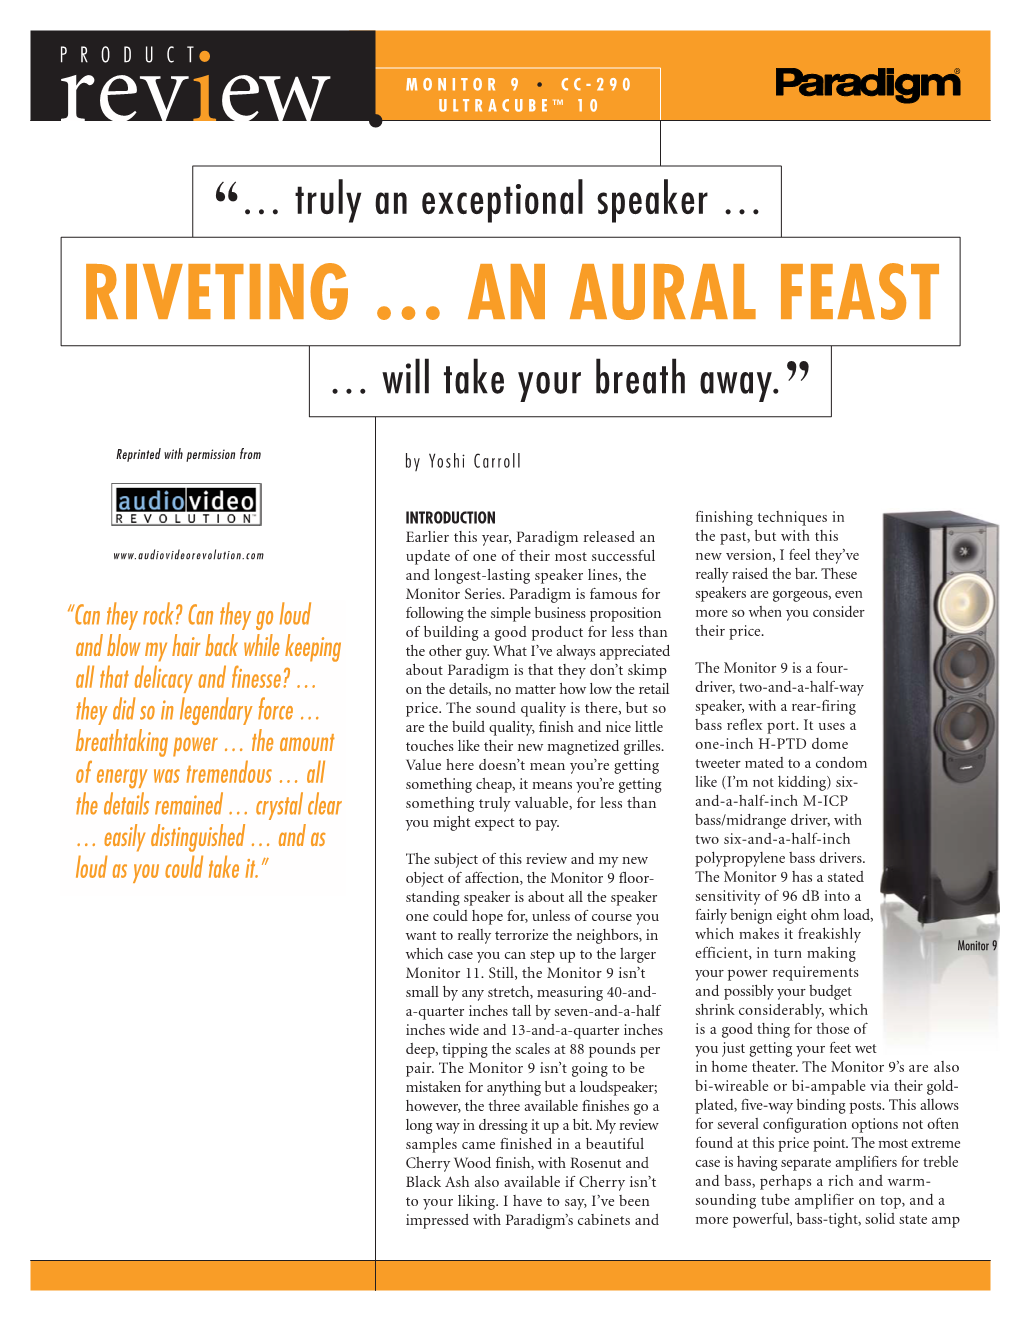 Review ULTRACUBE™ 10 “… Truly an Exceptional Speaker … RIVETING … an AURAL FEAST … Will Take Your Breath Away.”